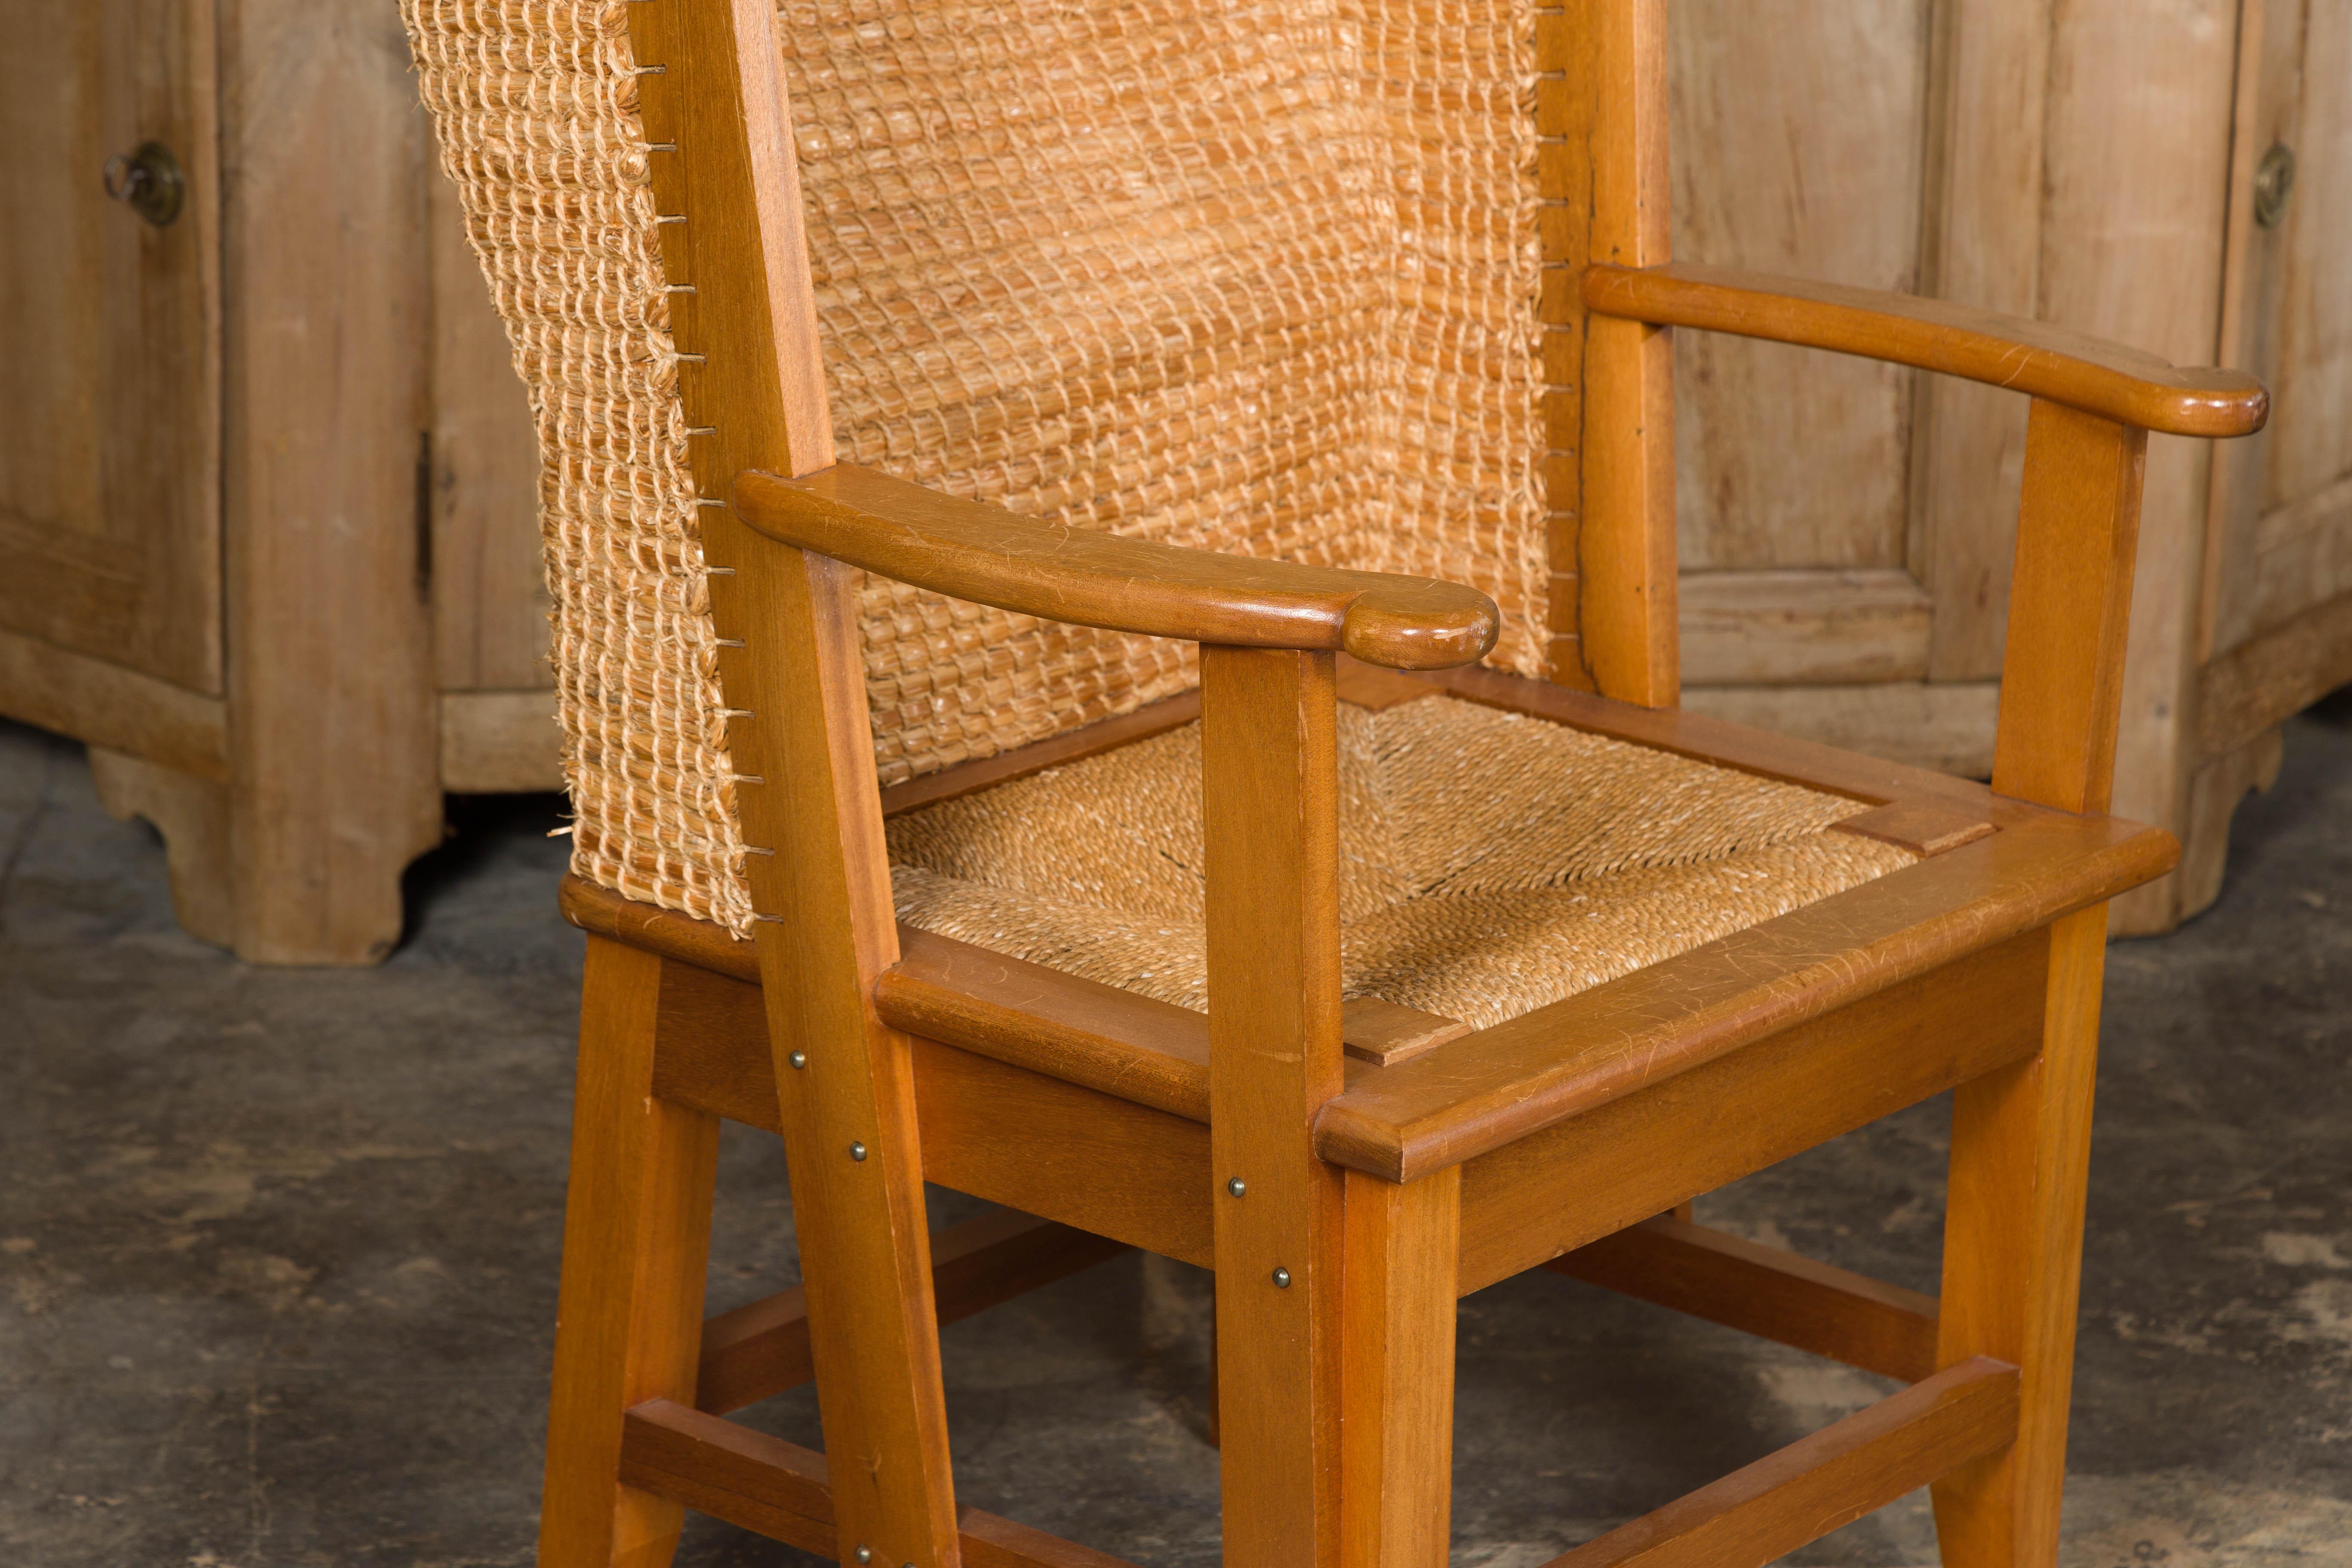 Orkney Island Midcentury Scottish Canopy Chair with Hand Woven Straw Back For Sale 6